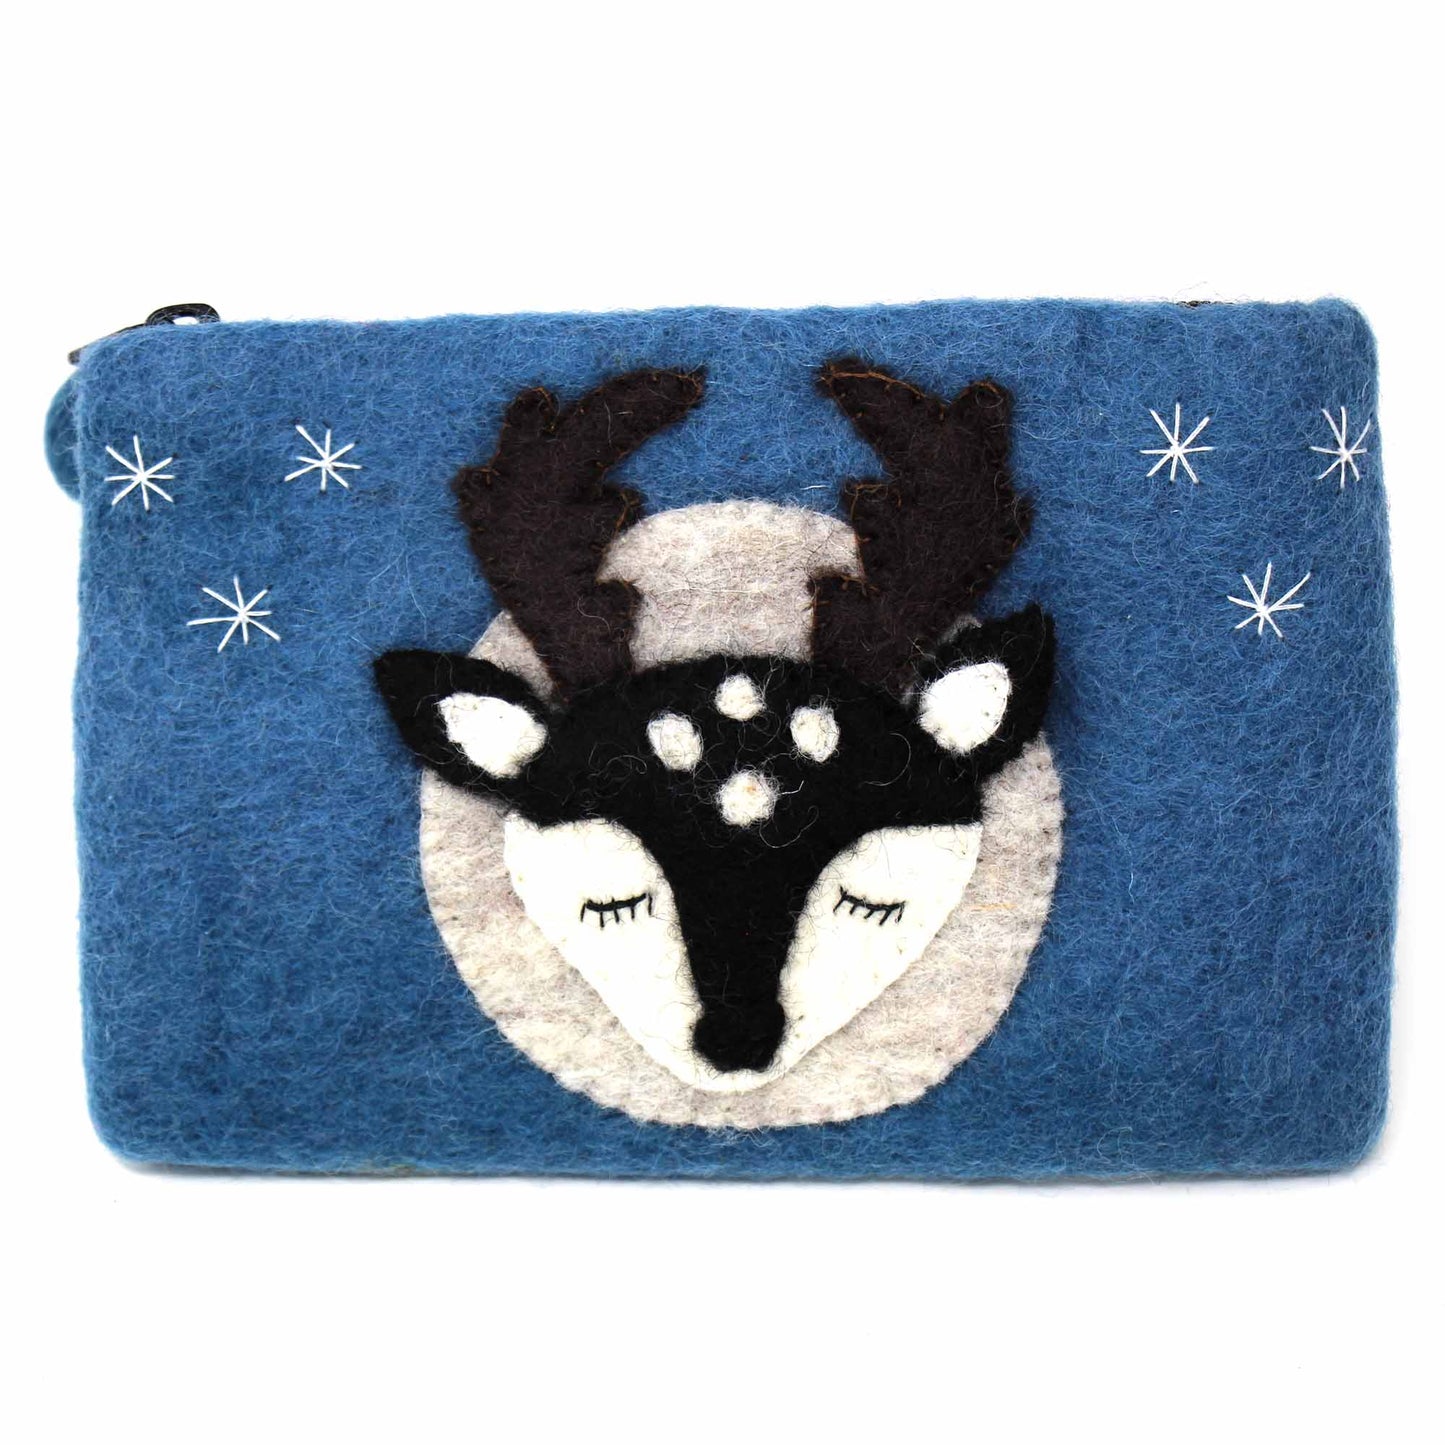 Hand Crafted Felt: Stag Pouch - Linda Kay Gifford’s - Those Nasty Women TALK! by SWEETSurvivor